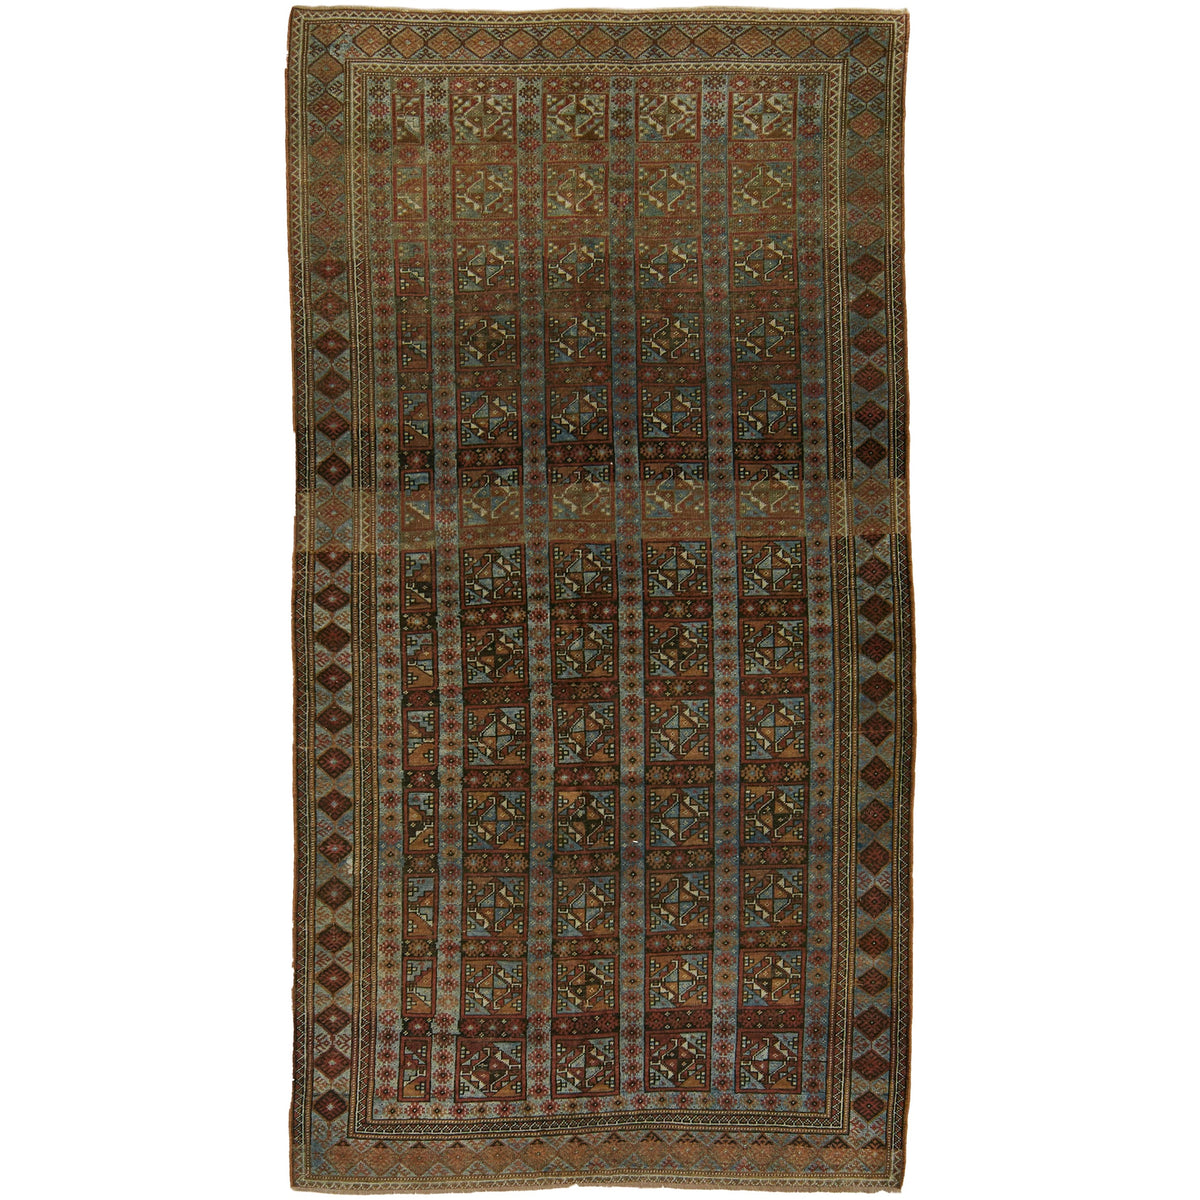 Janell - Timeless Elegance, Persian Roots | Kuden Rugs